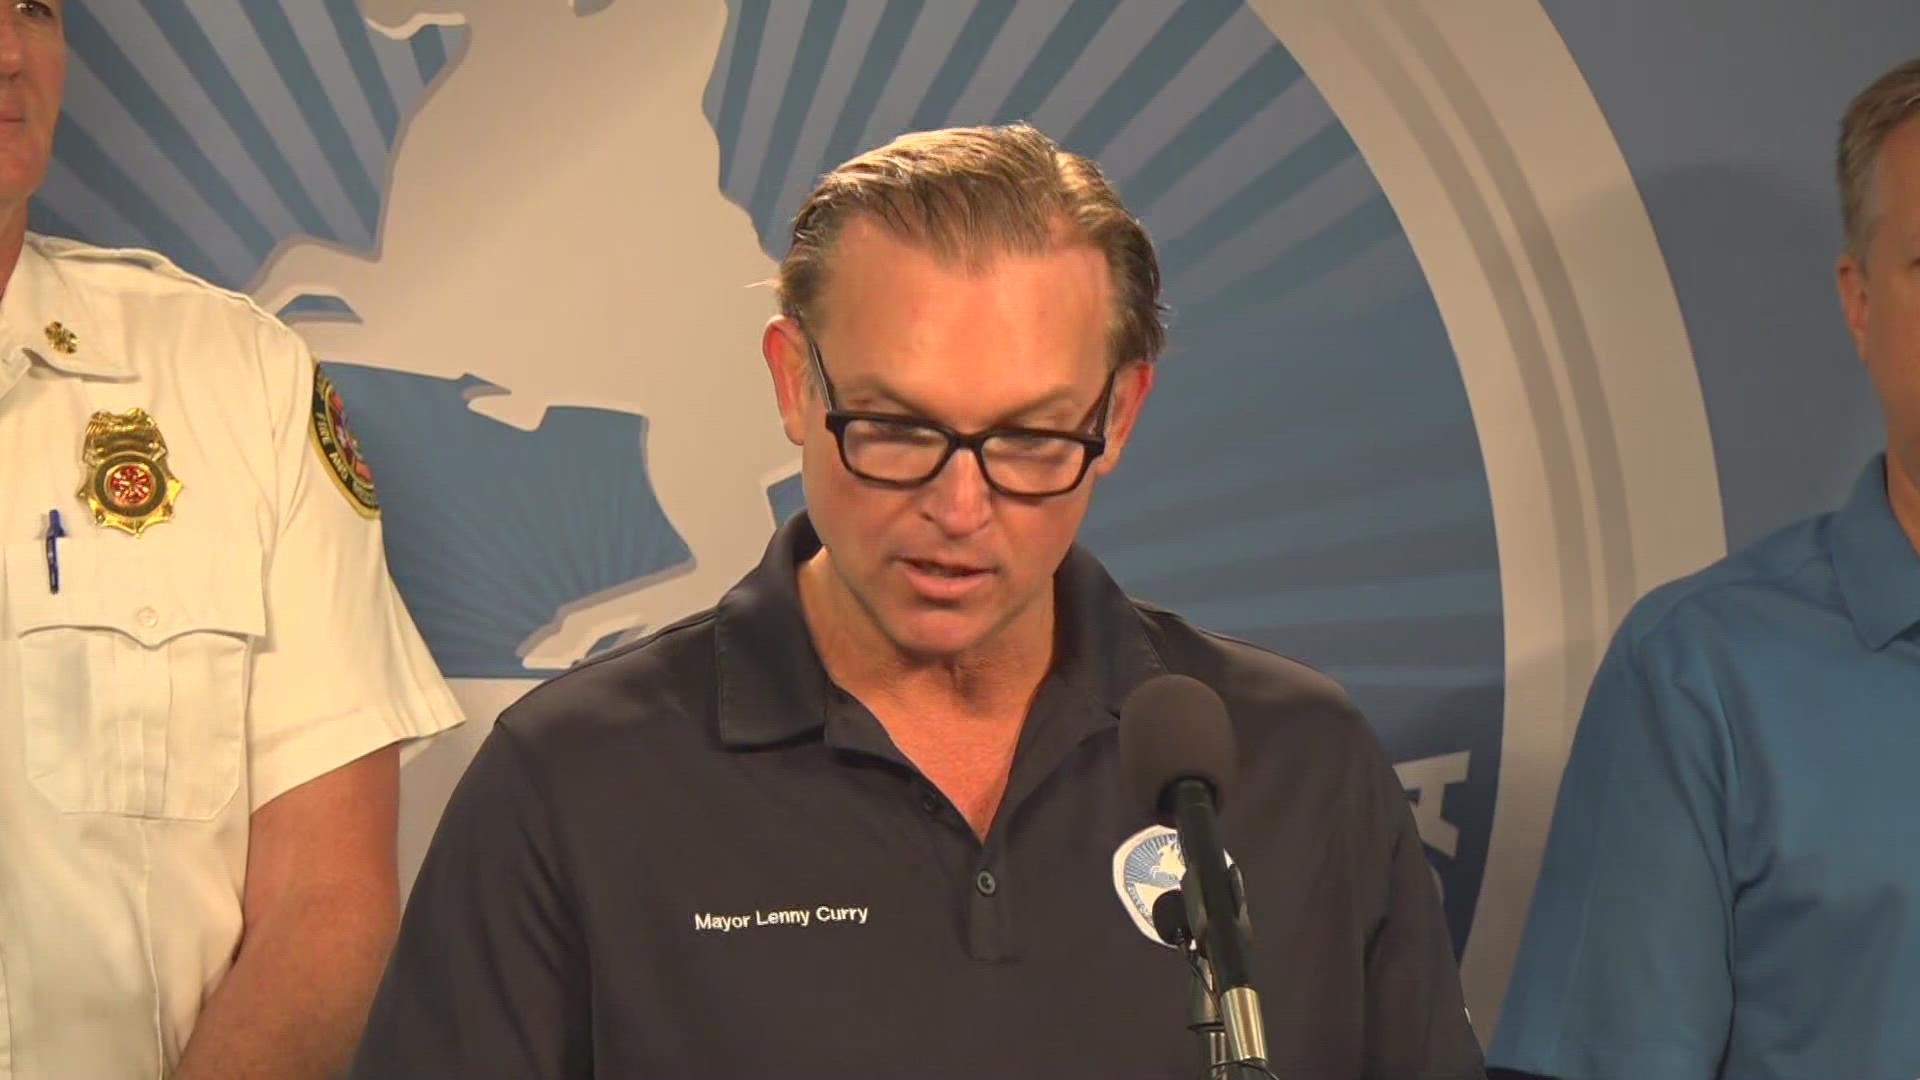 Jacksonville Mayor, Lenny Curry, held a news conference to provide the very latest on Hurricane Ian as it approaches Florida as a powerful Cat 4 storm.